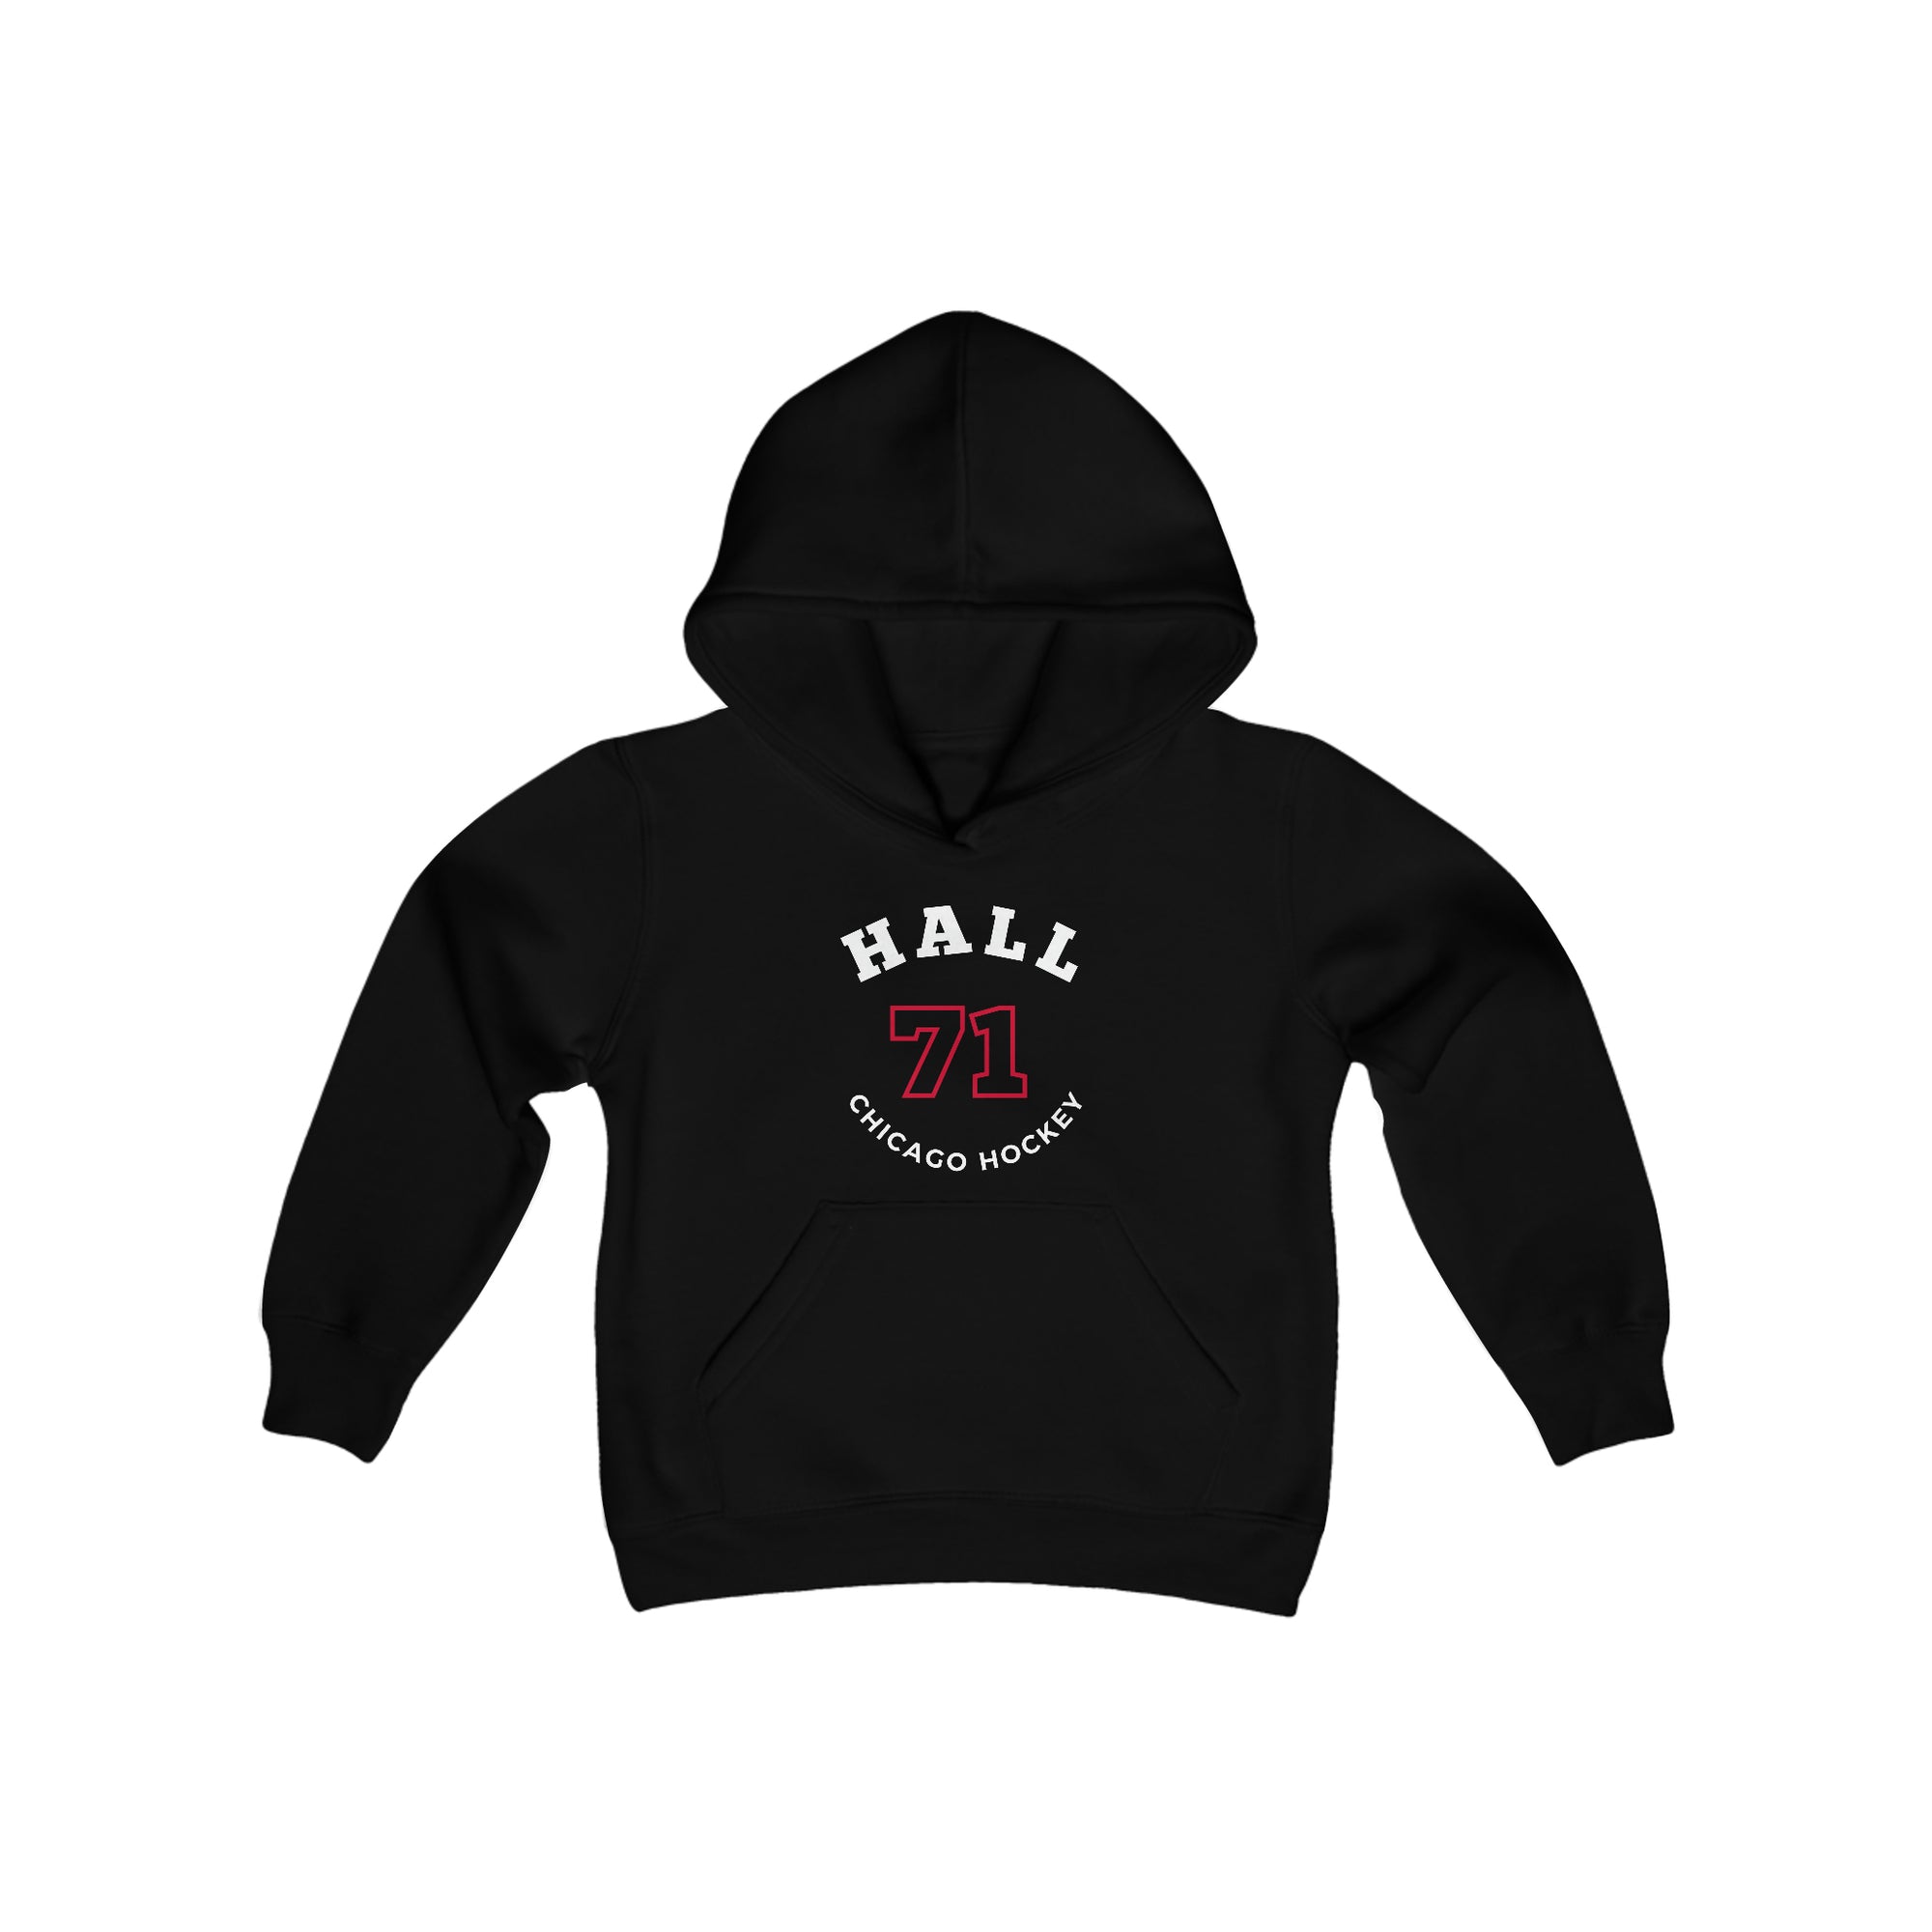 Hall 71 Chicago Hockey Number Arch Design Youth Hooded Sweatshirt